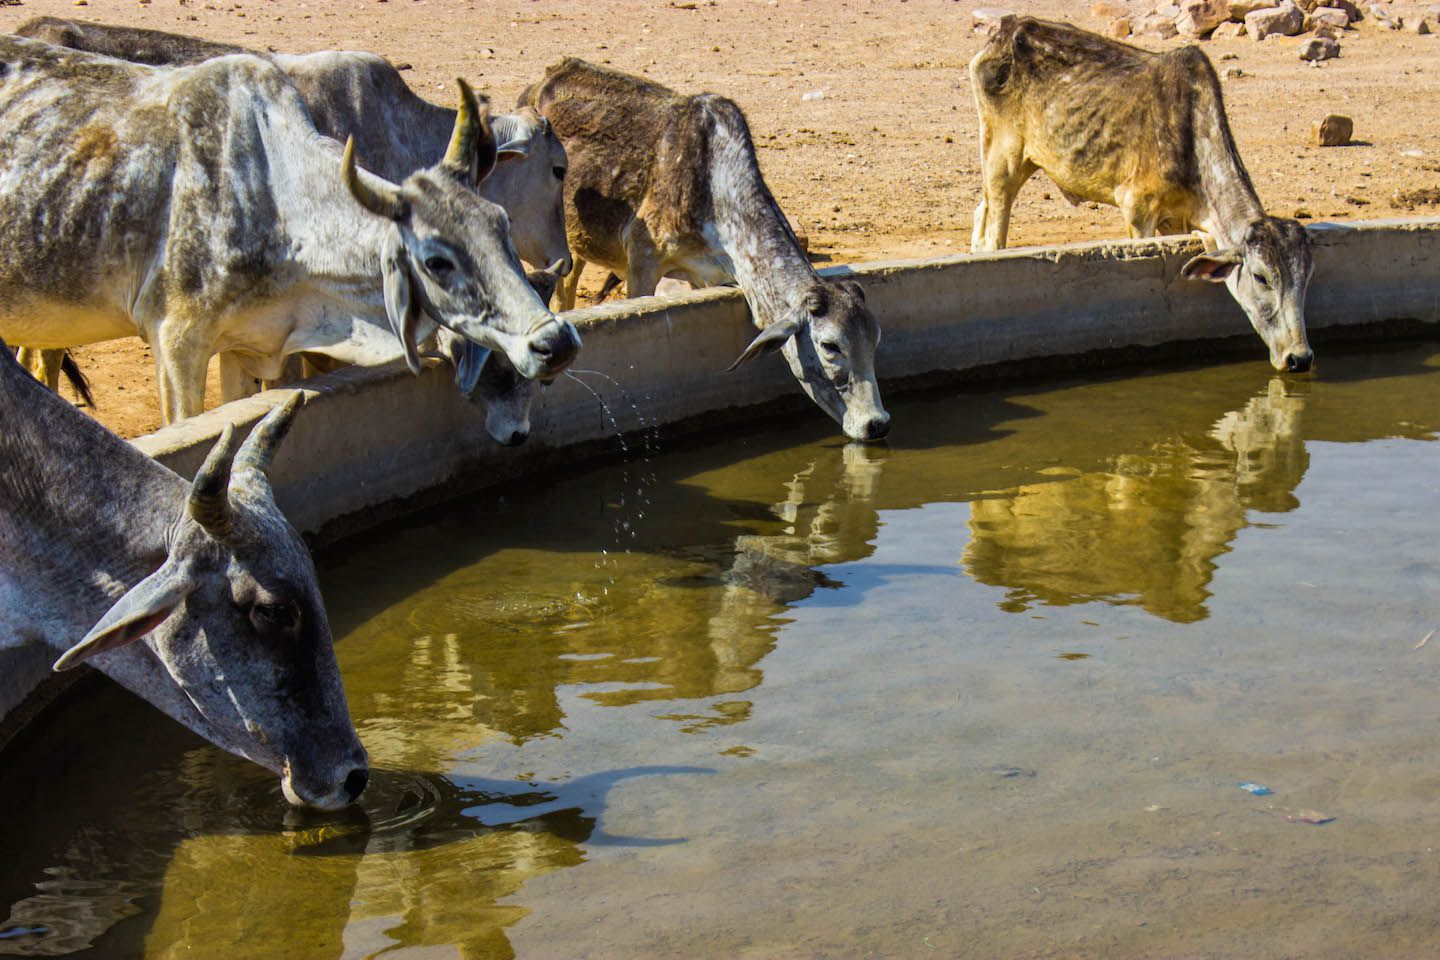 Cows drinking water in the villages of the Thar Desert, Jaisalmer, India